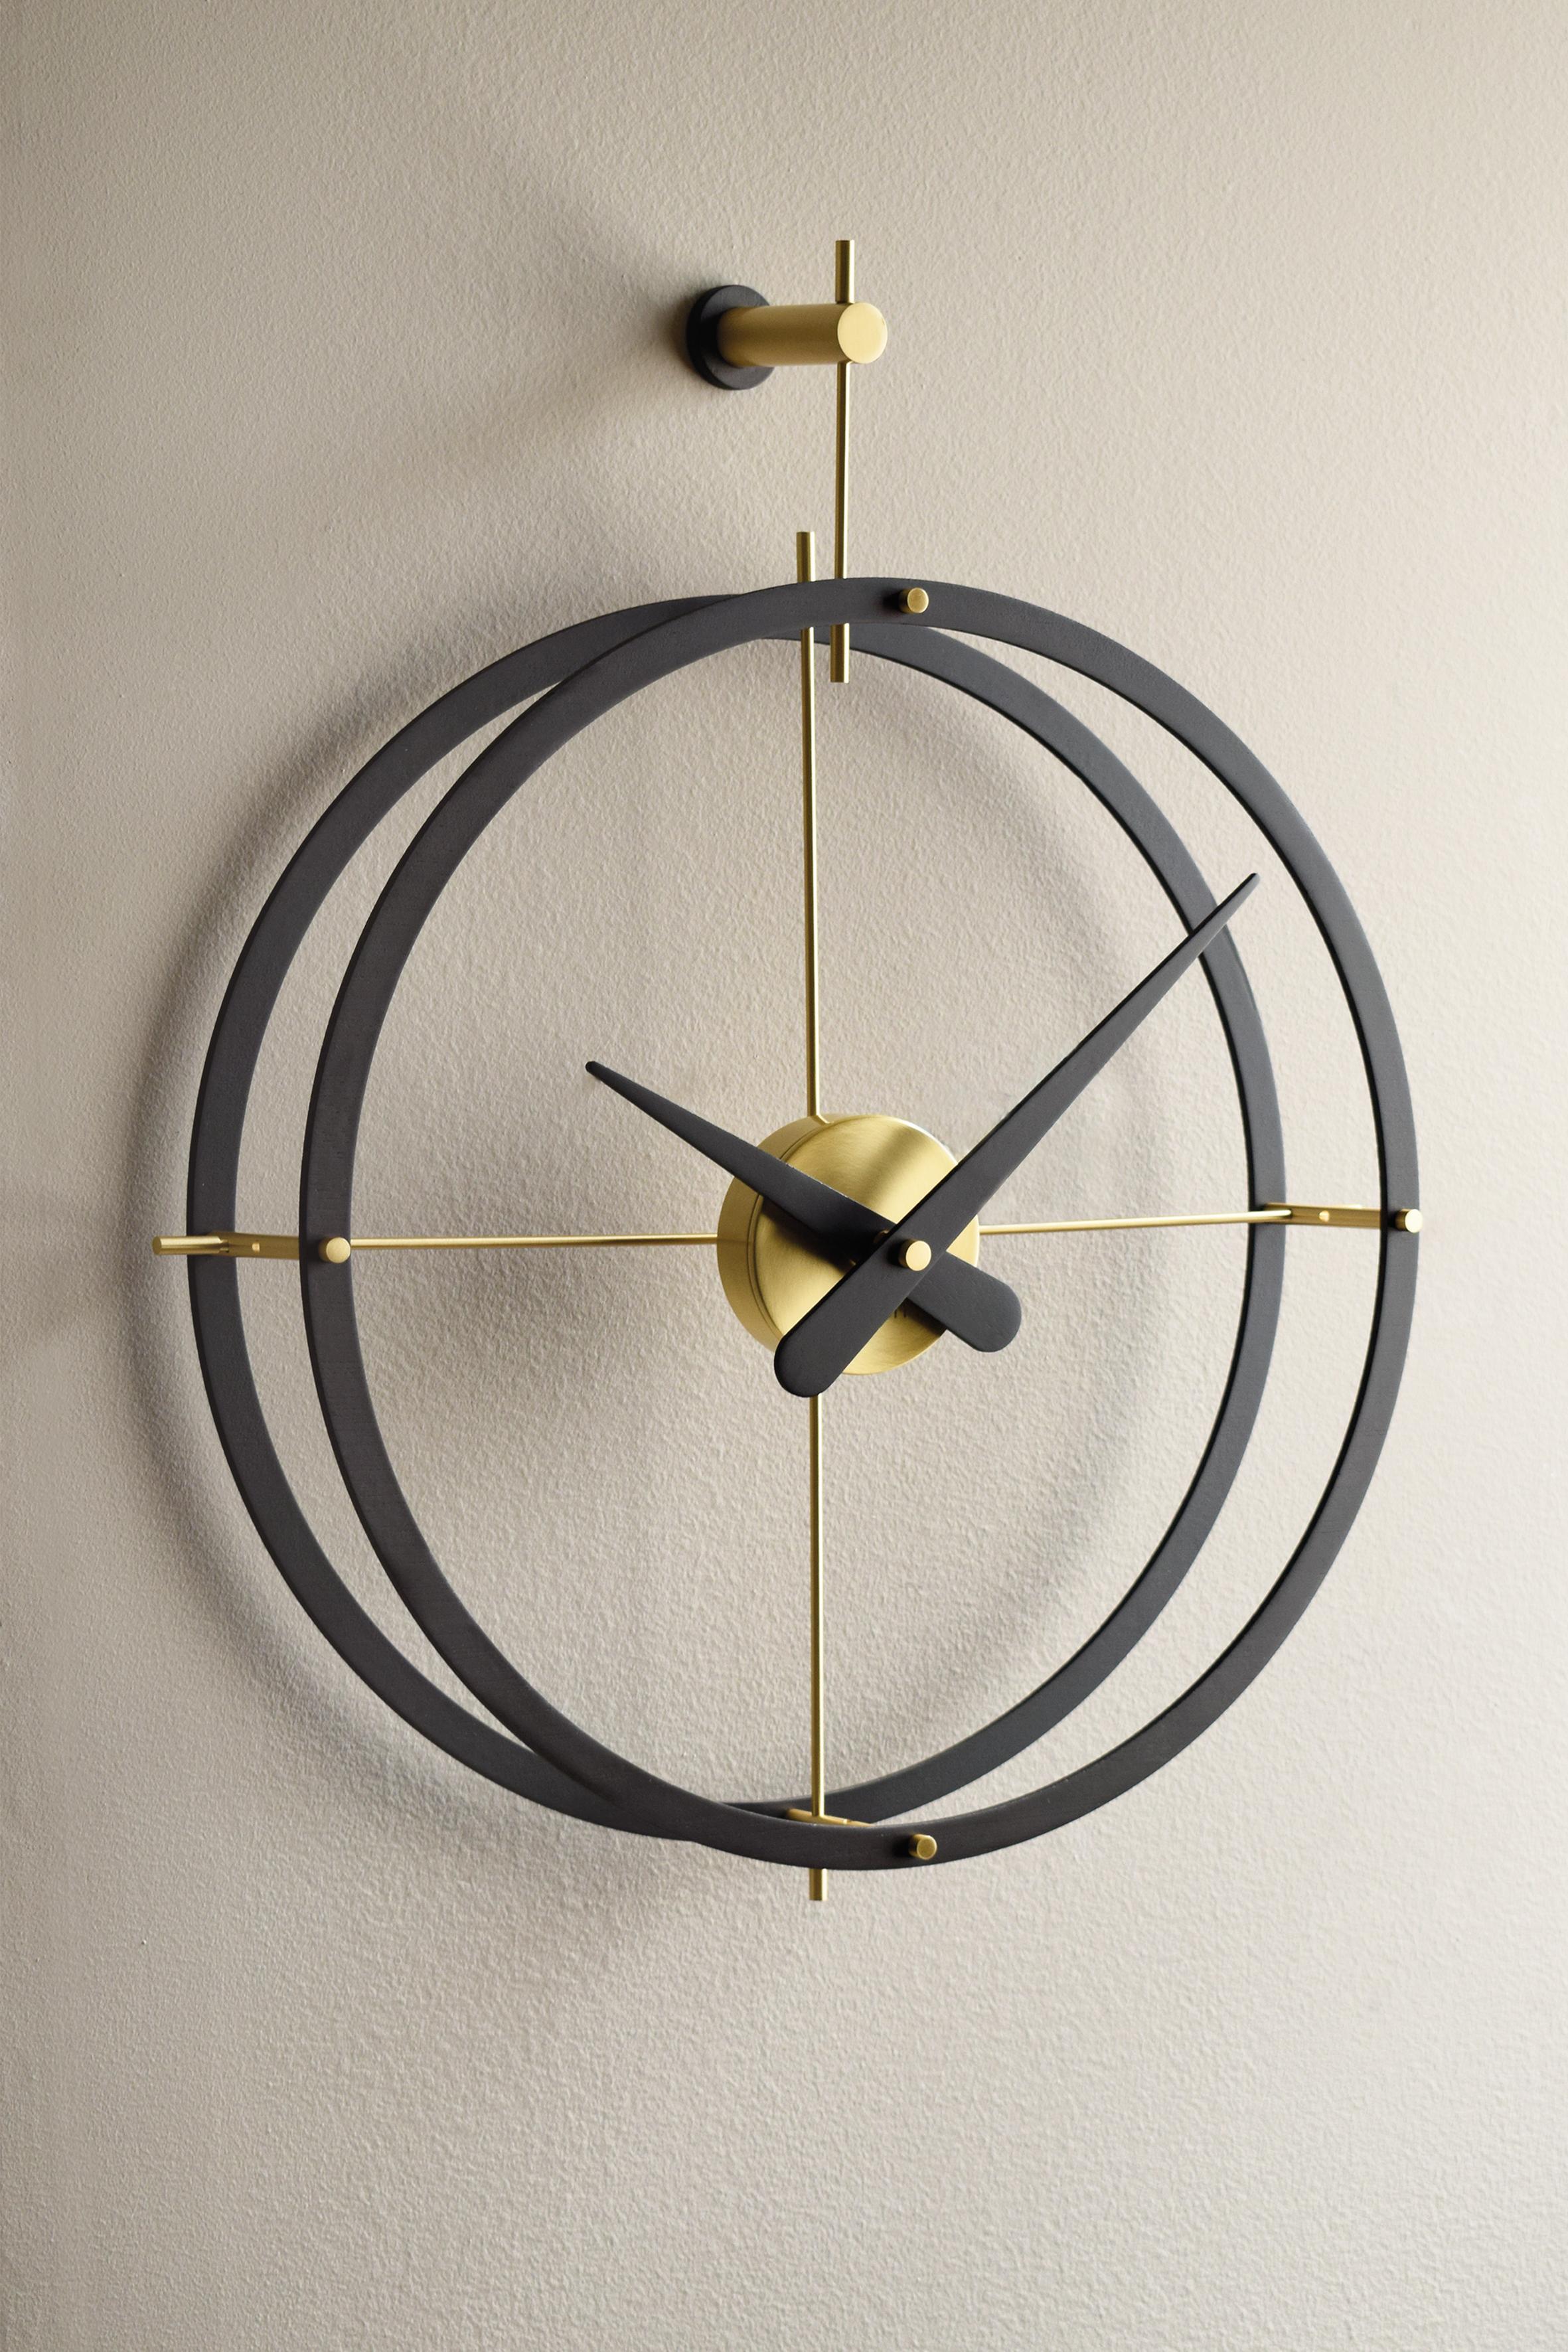 Nomon Dos Puntos Wall Clock By Jose Maria Reina In New Condition For Sale In Brooklyn, NY